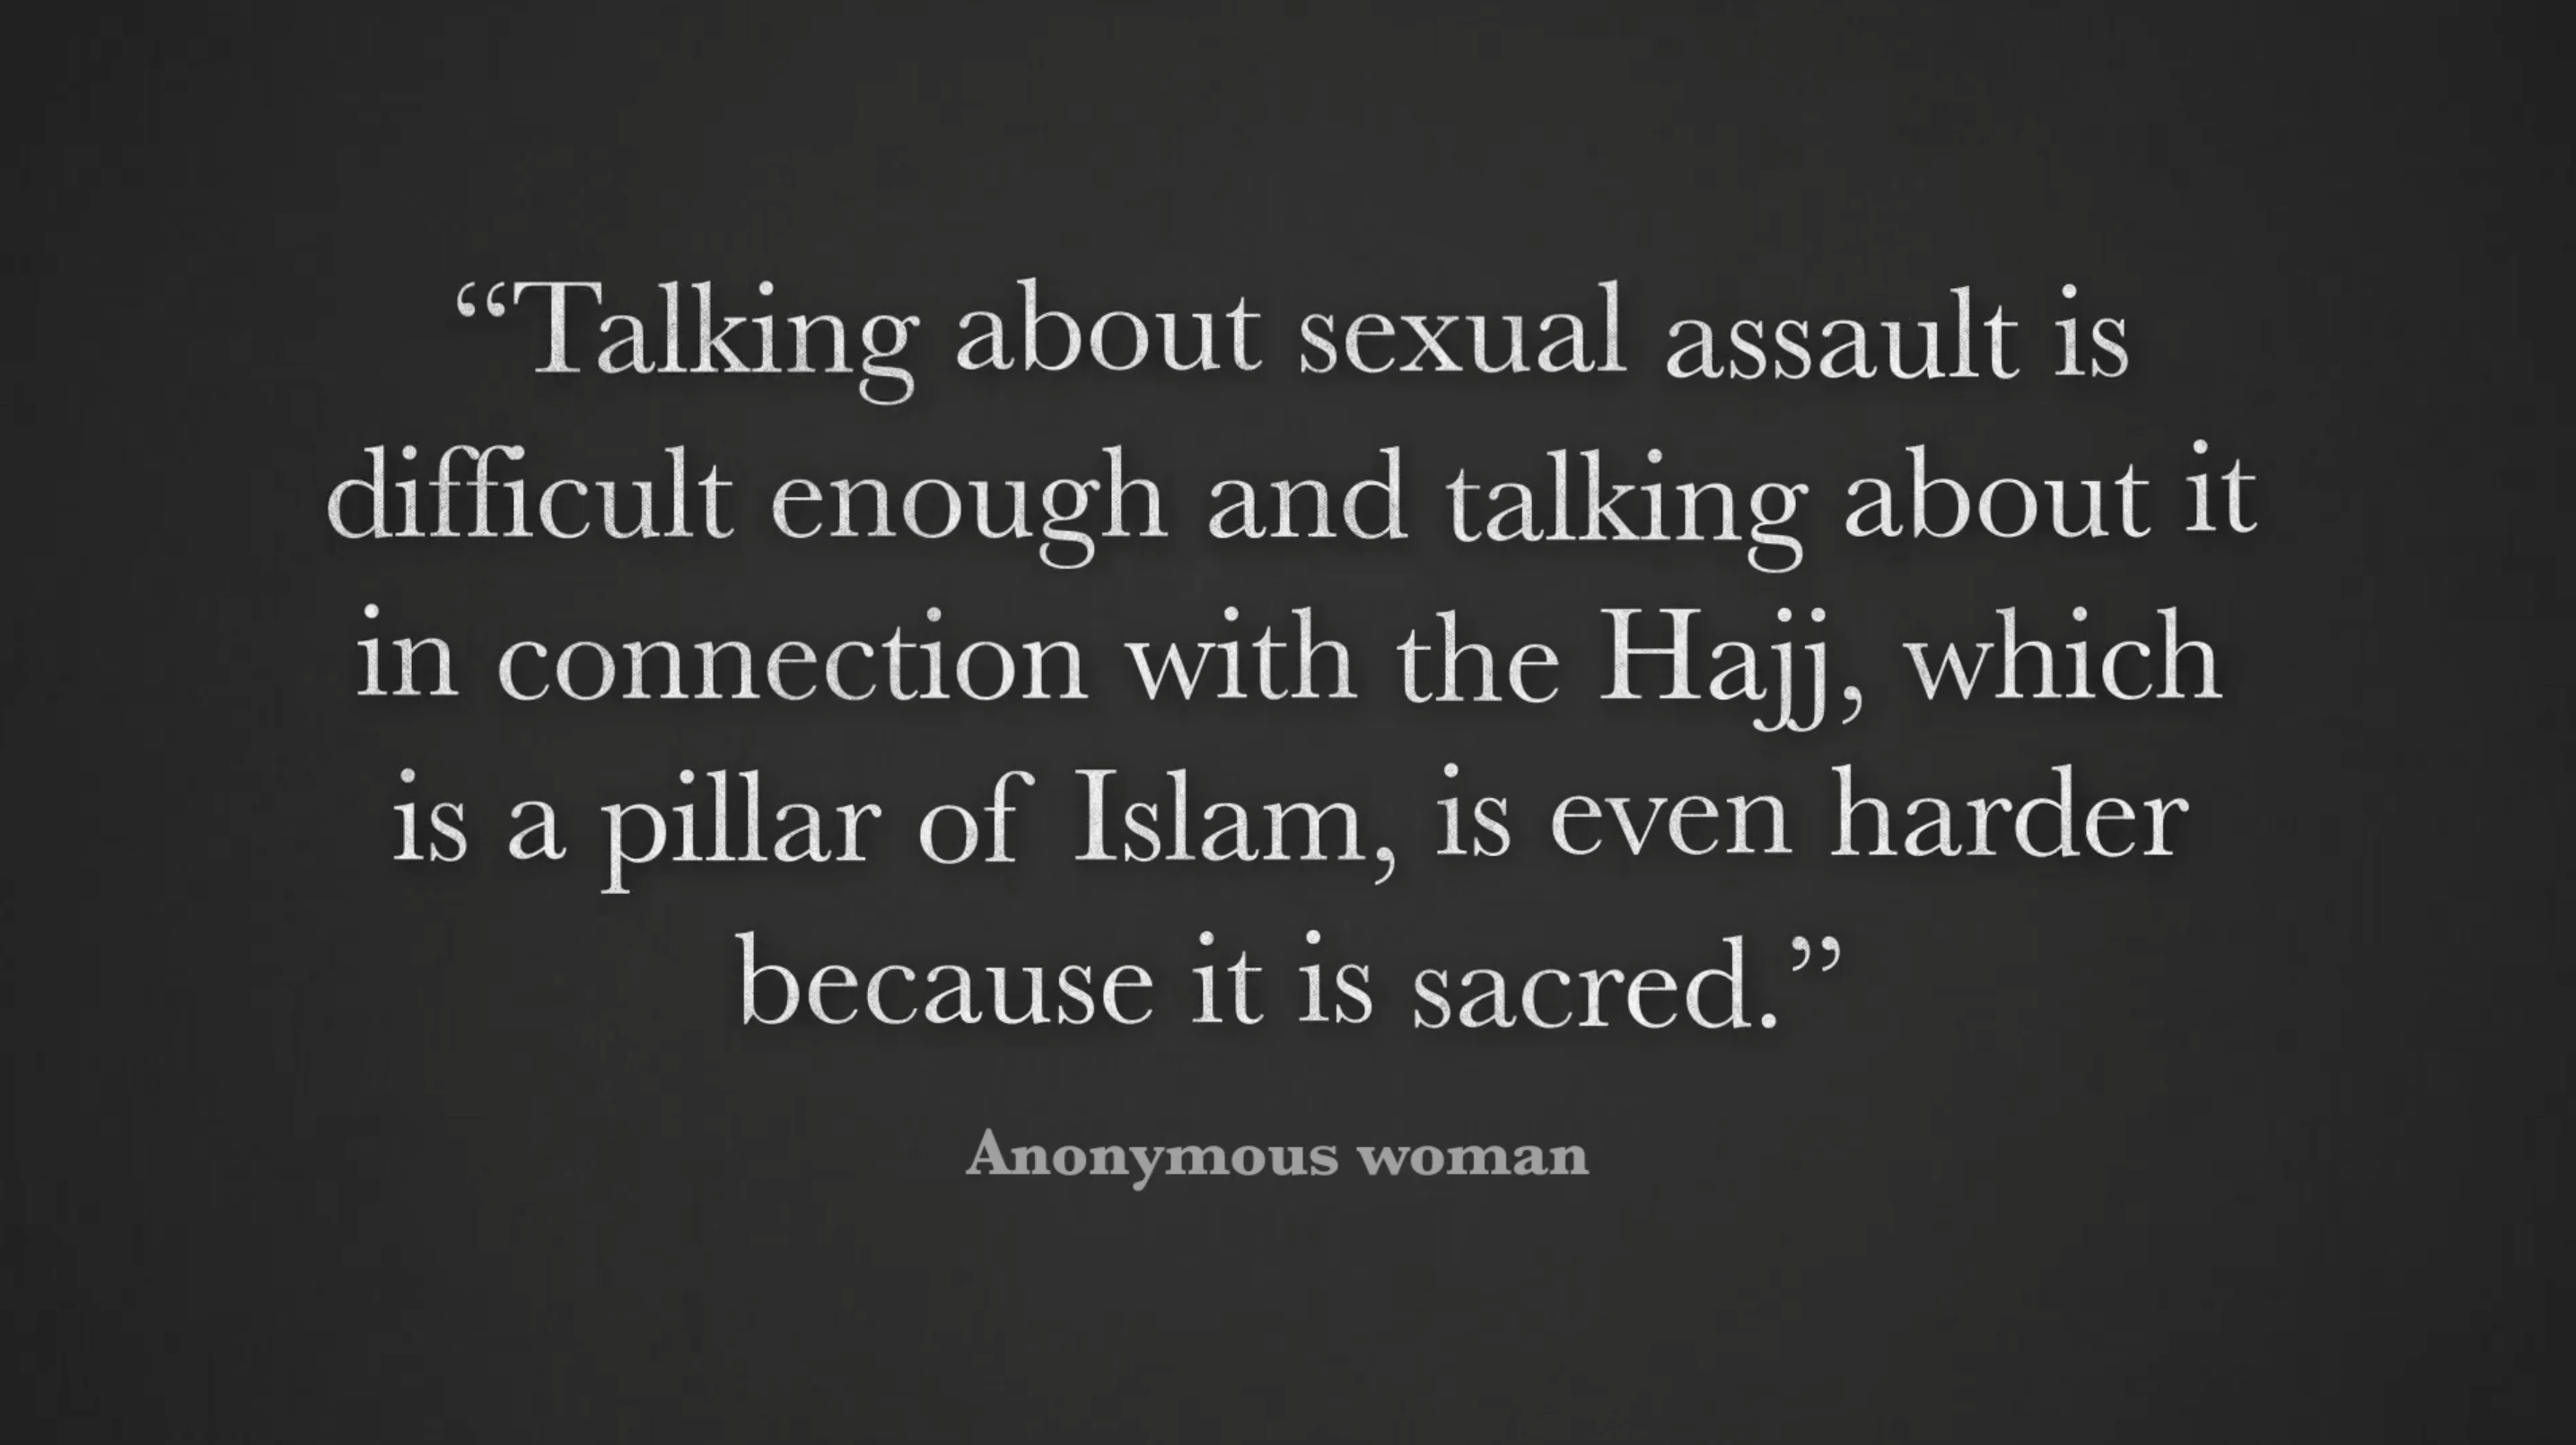 I never told anyone 5 womens stories of sexual abuse at the Hajj